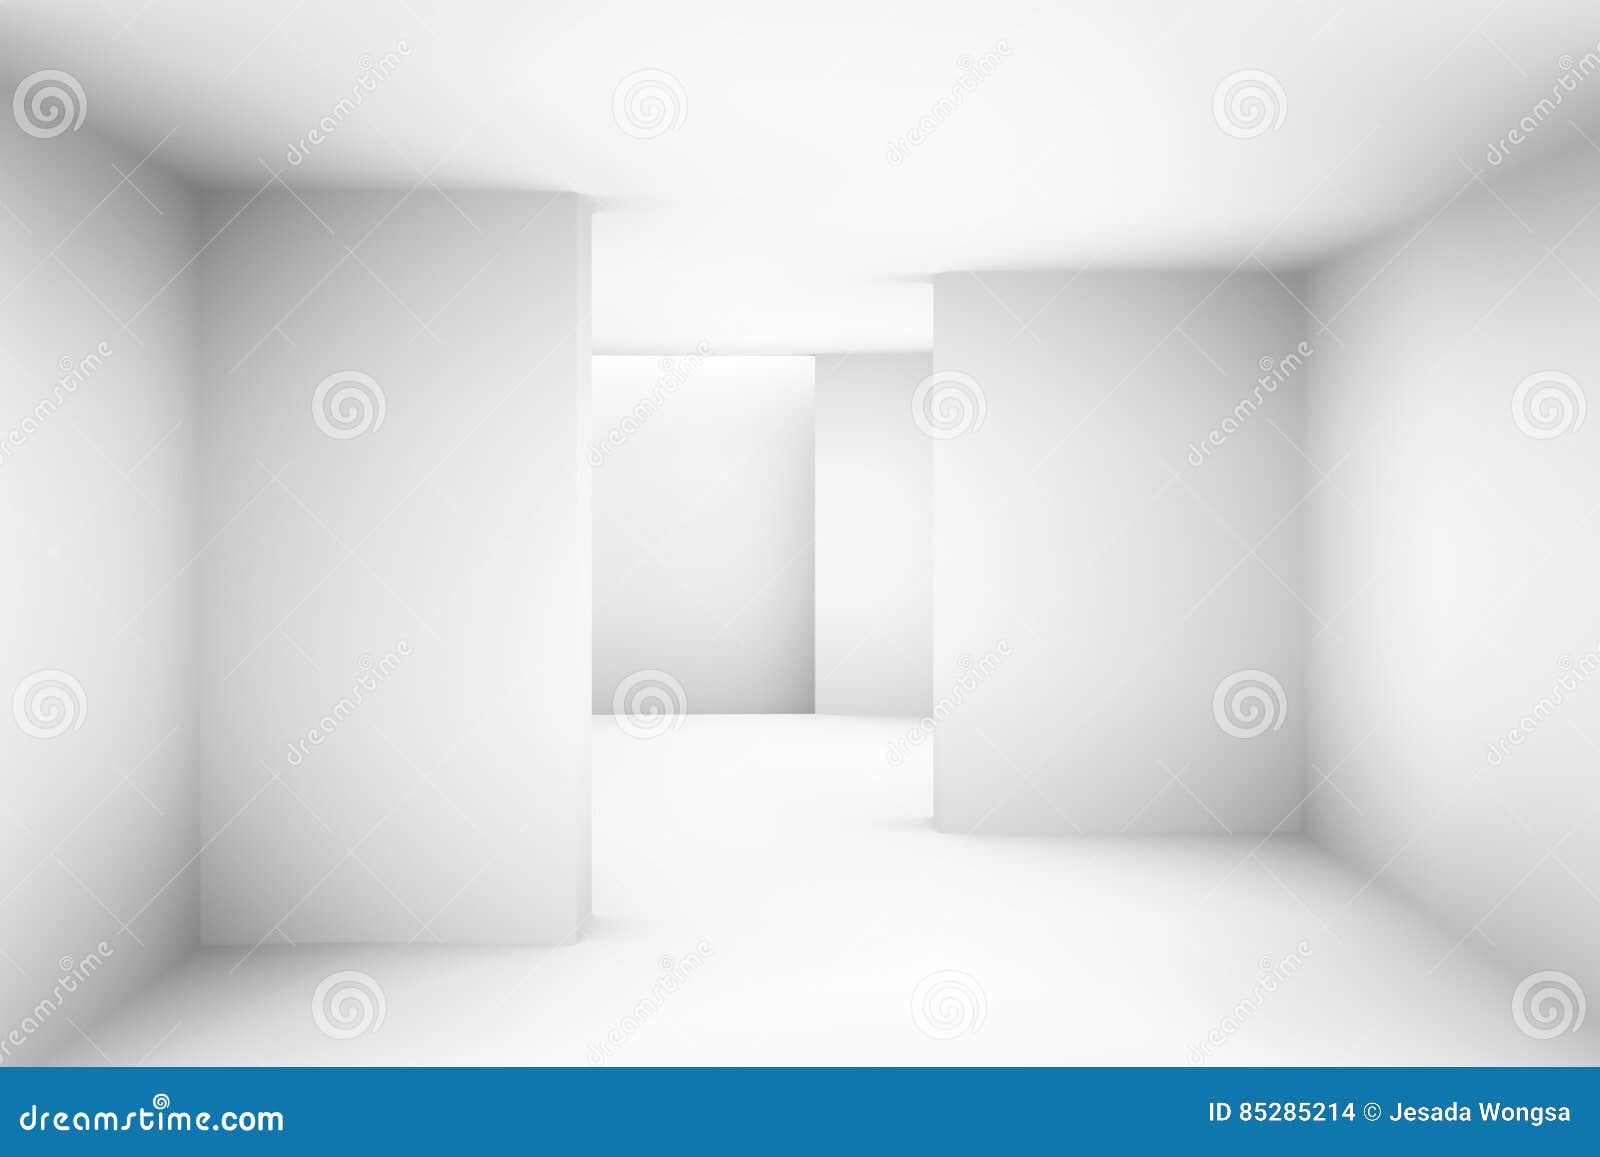 Abstract White Simple Empty Room Highlights Future